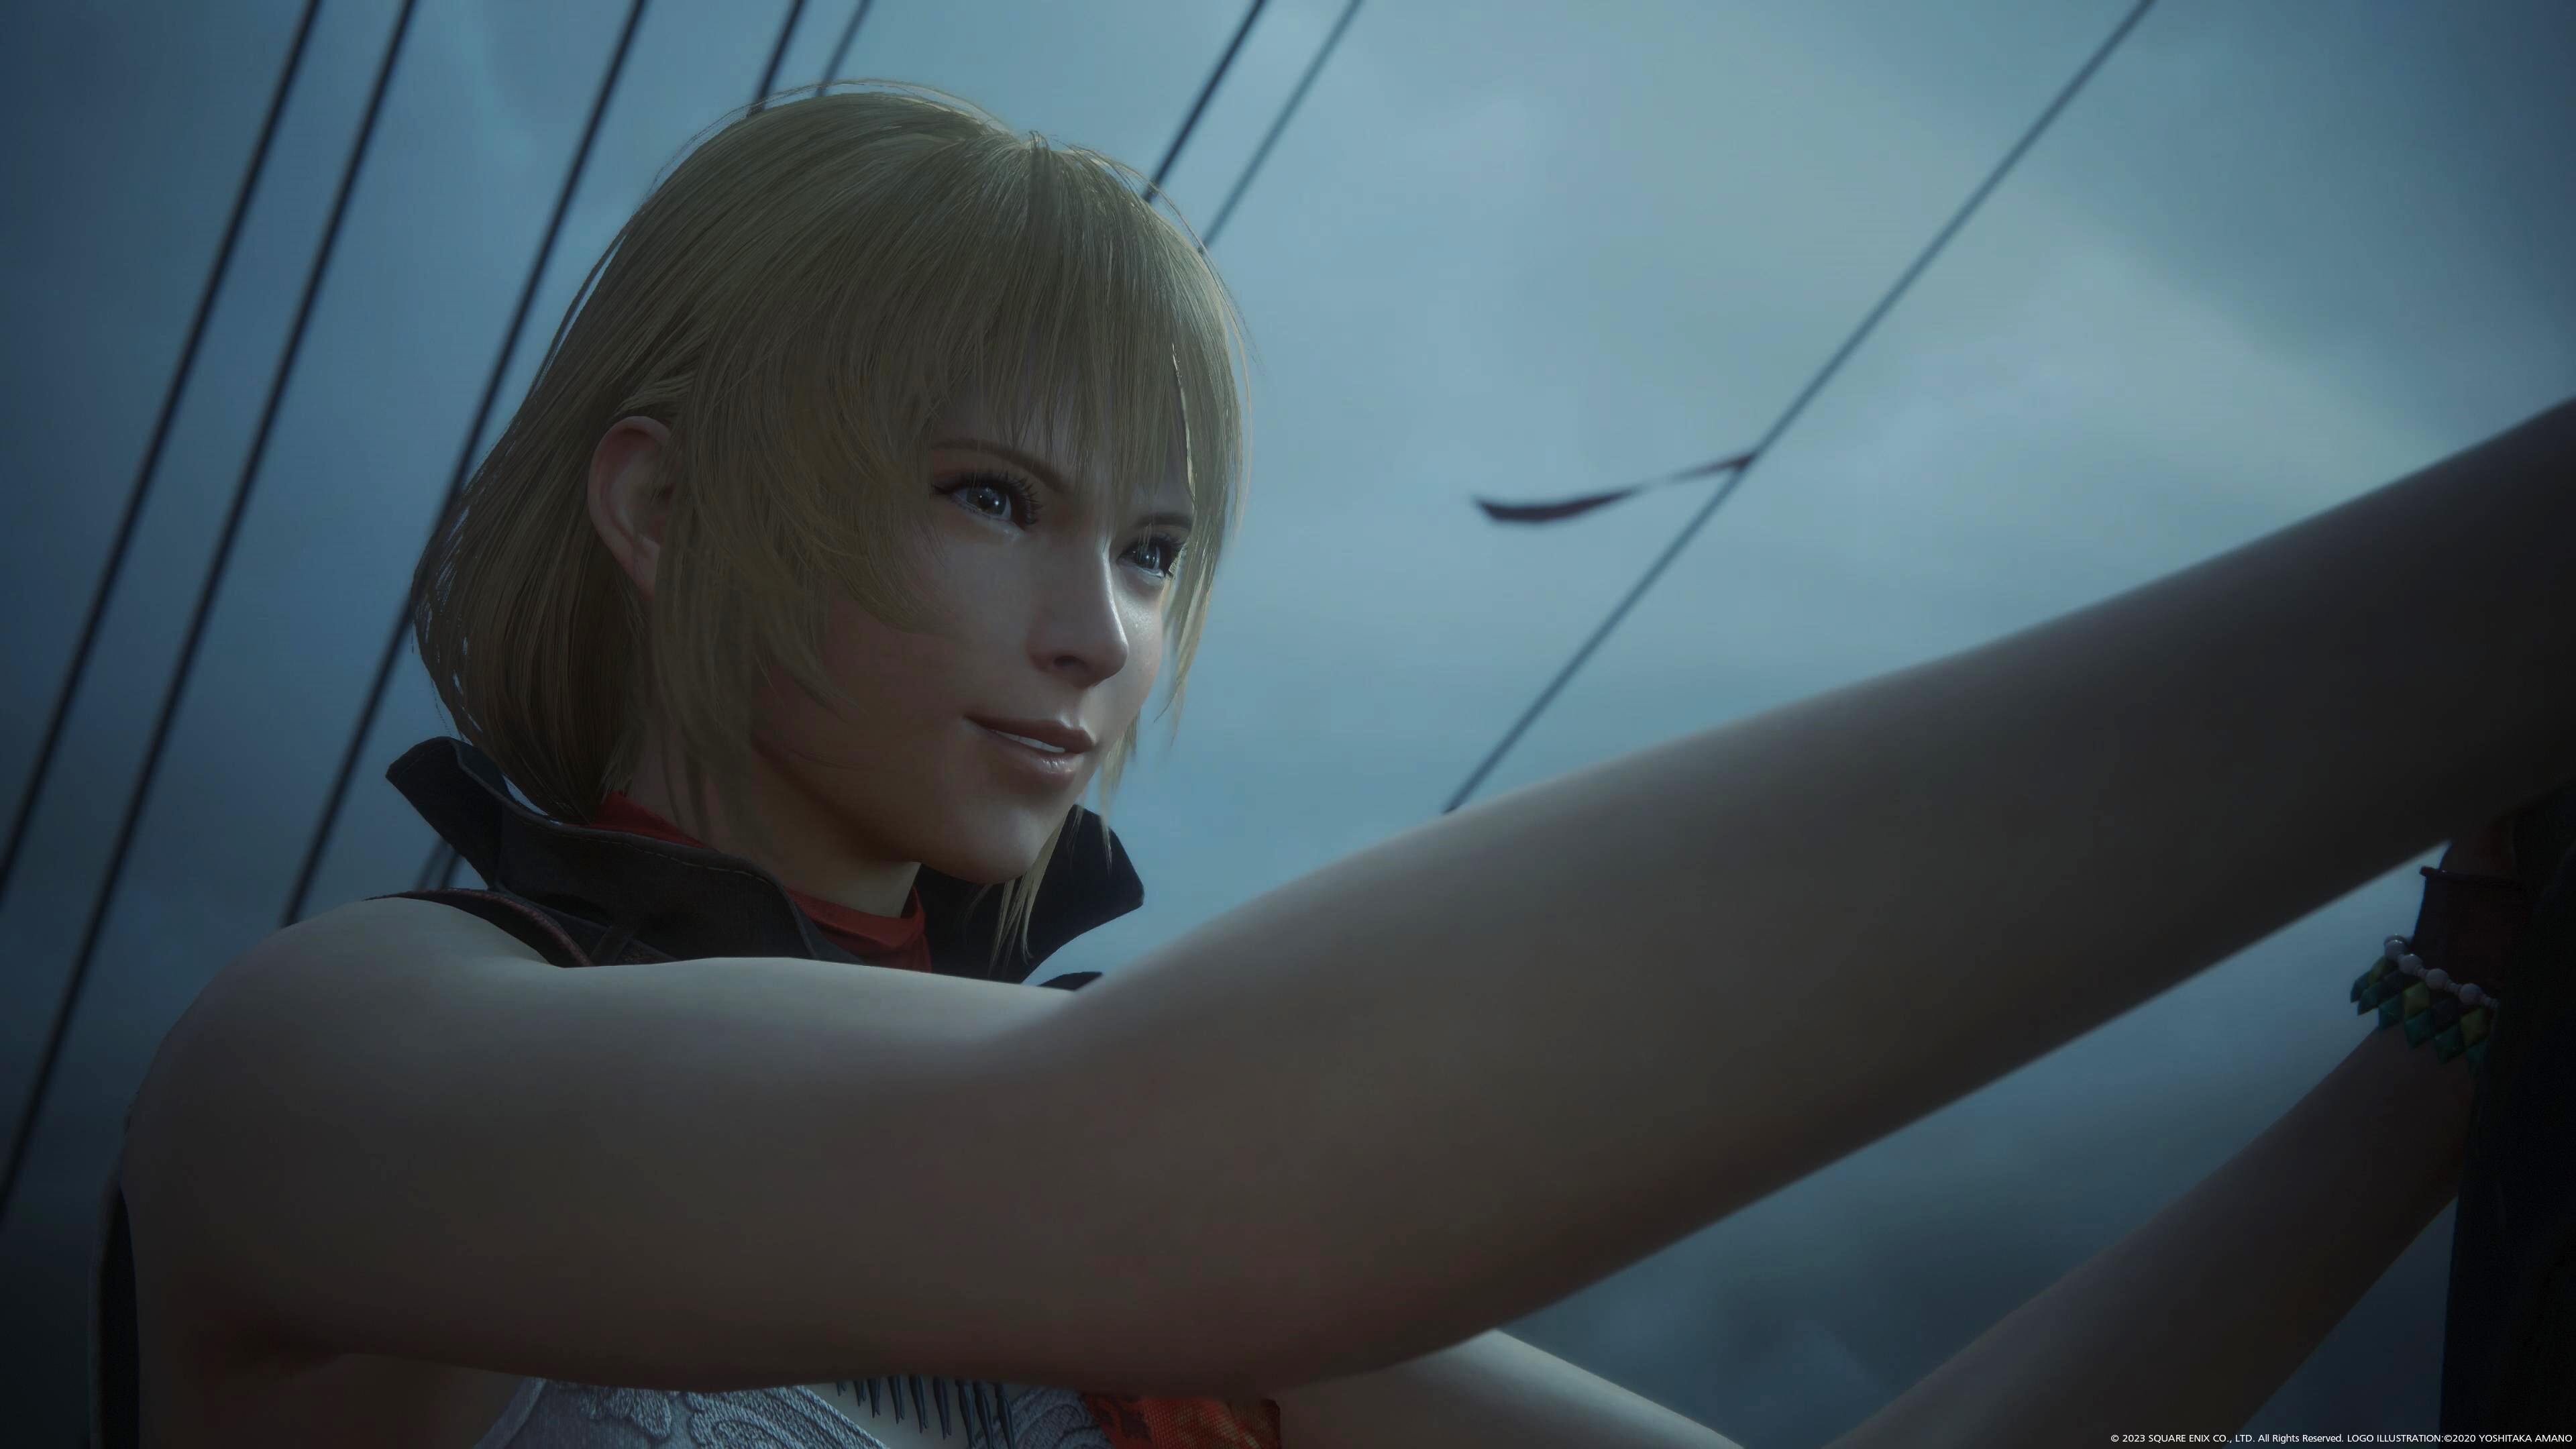 metacritic on X: Final Fantasy XVI - hands-on impressions from 30